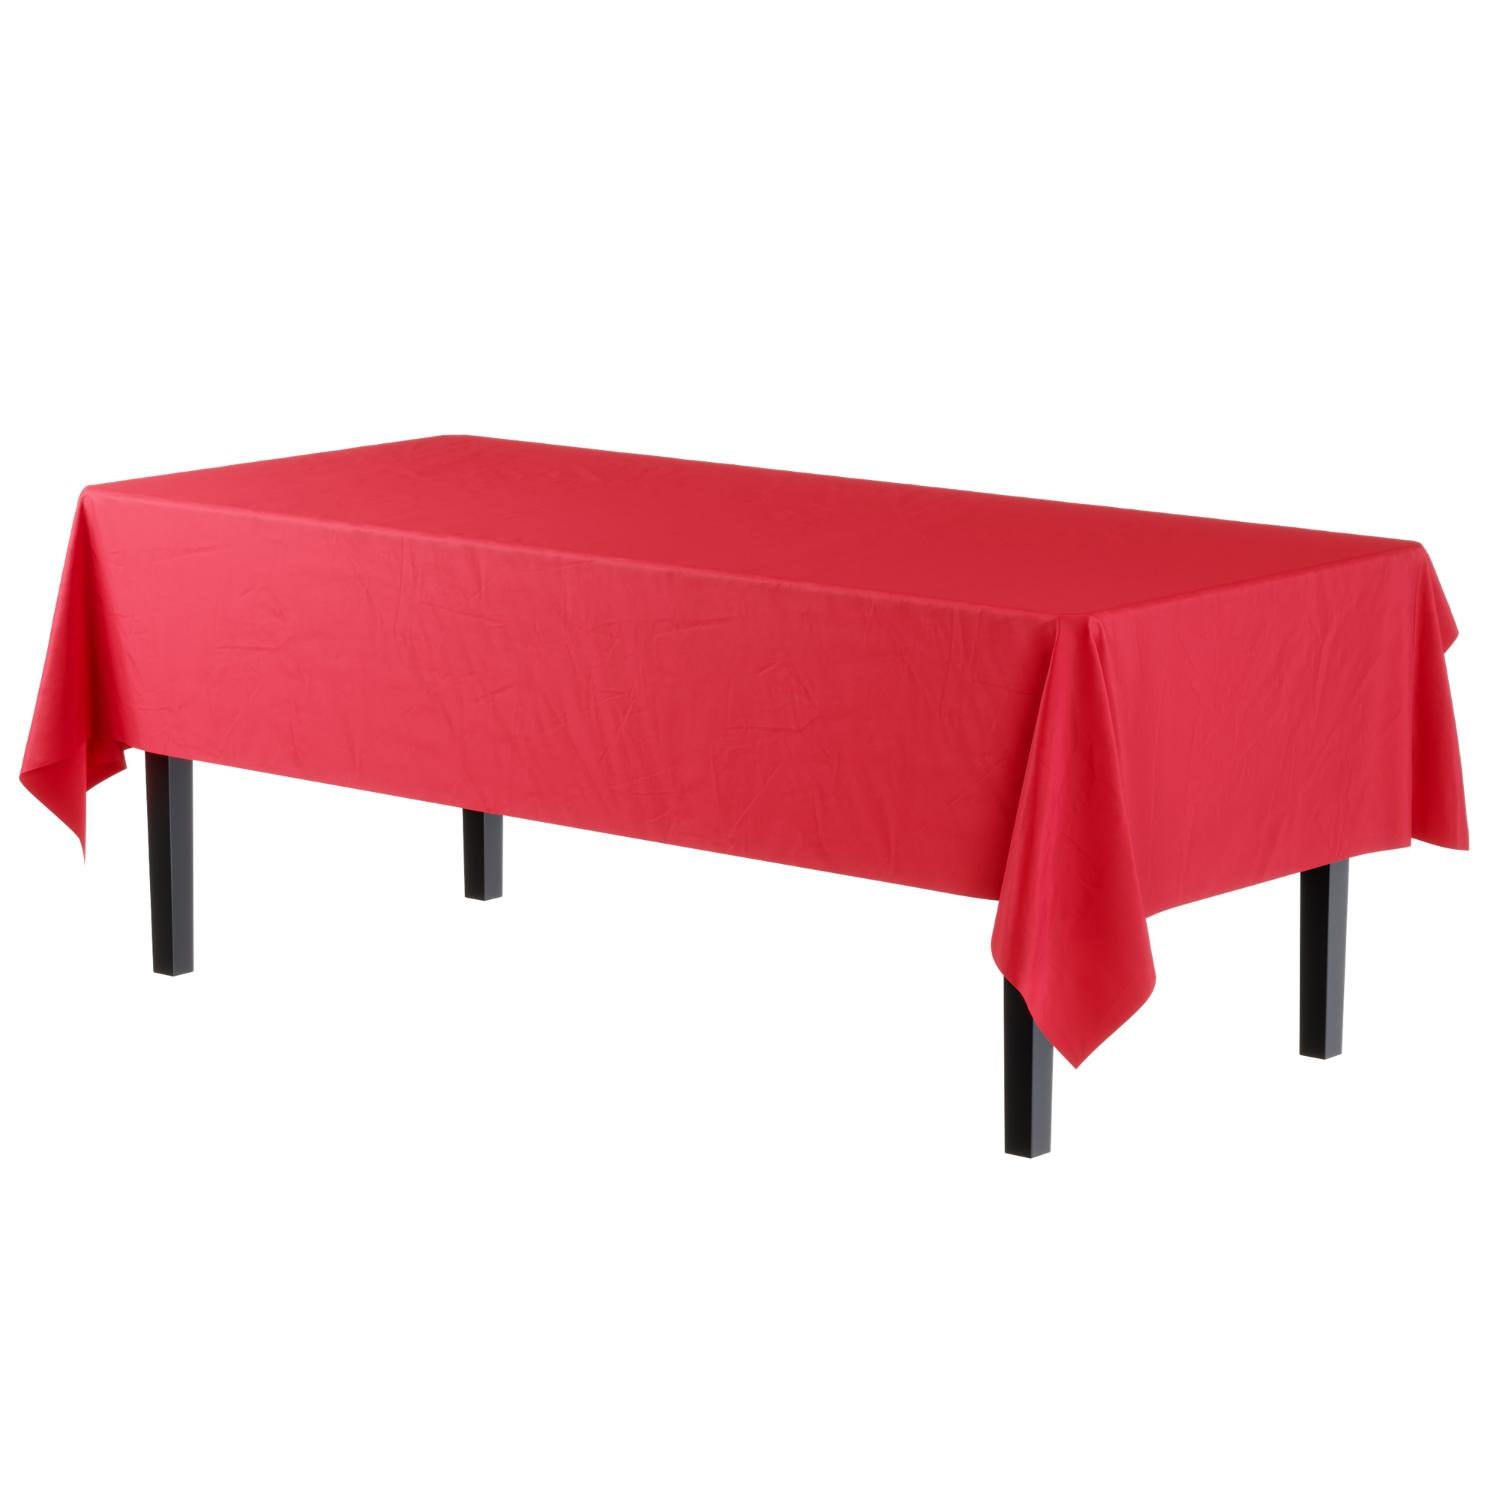 Premium Red Table Cover - 96 Ct.